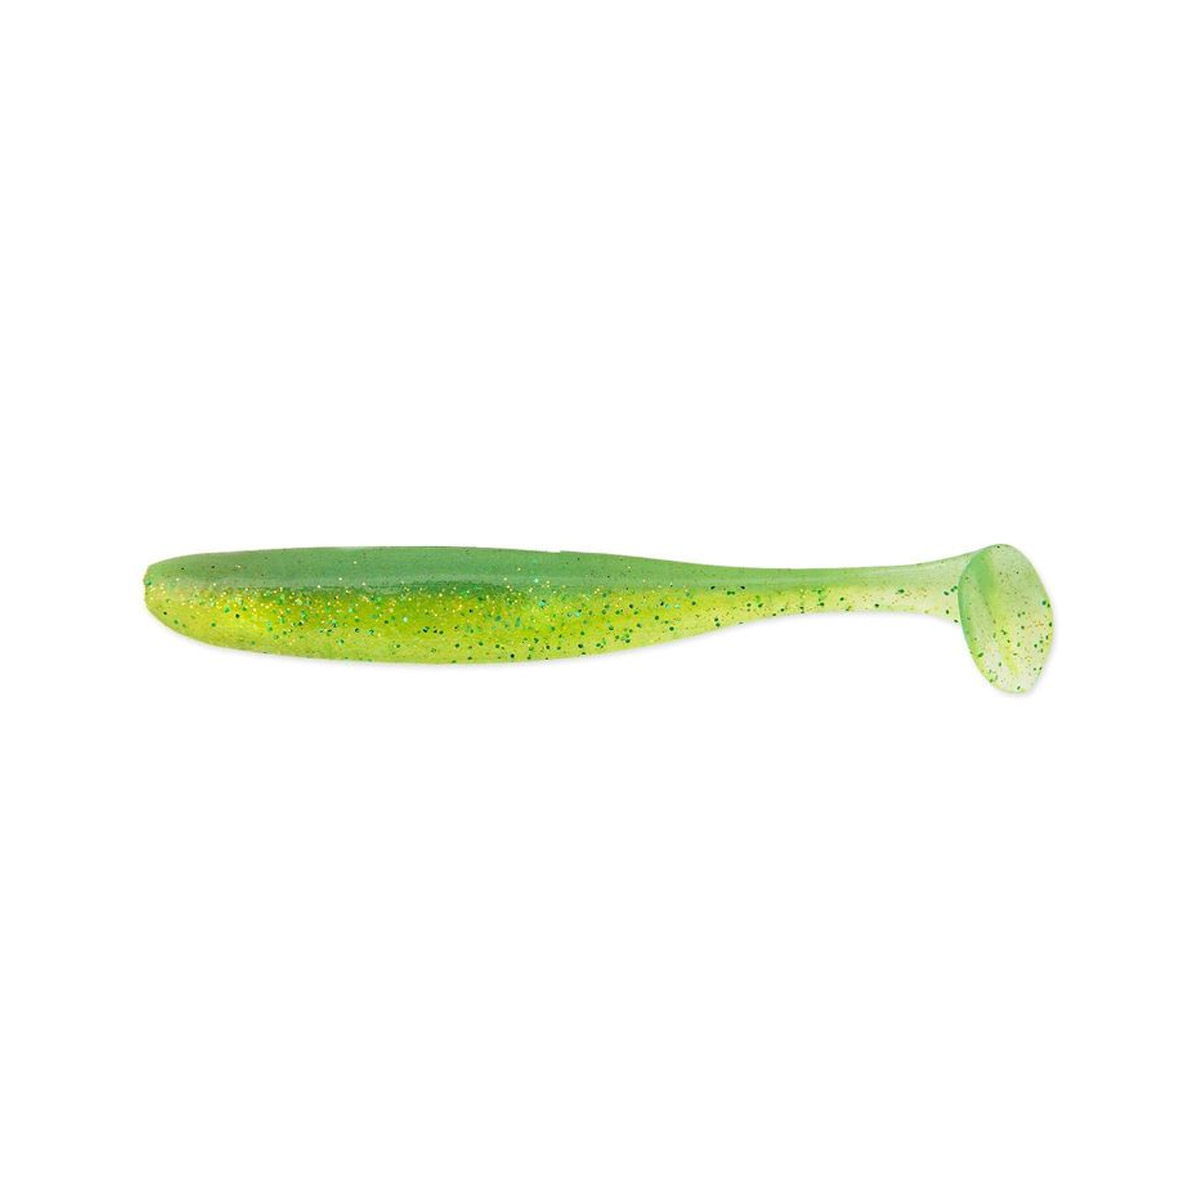 Keitech Easy Shiner 2 inch -  Lime Chartreuse.